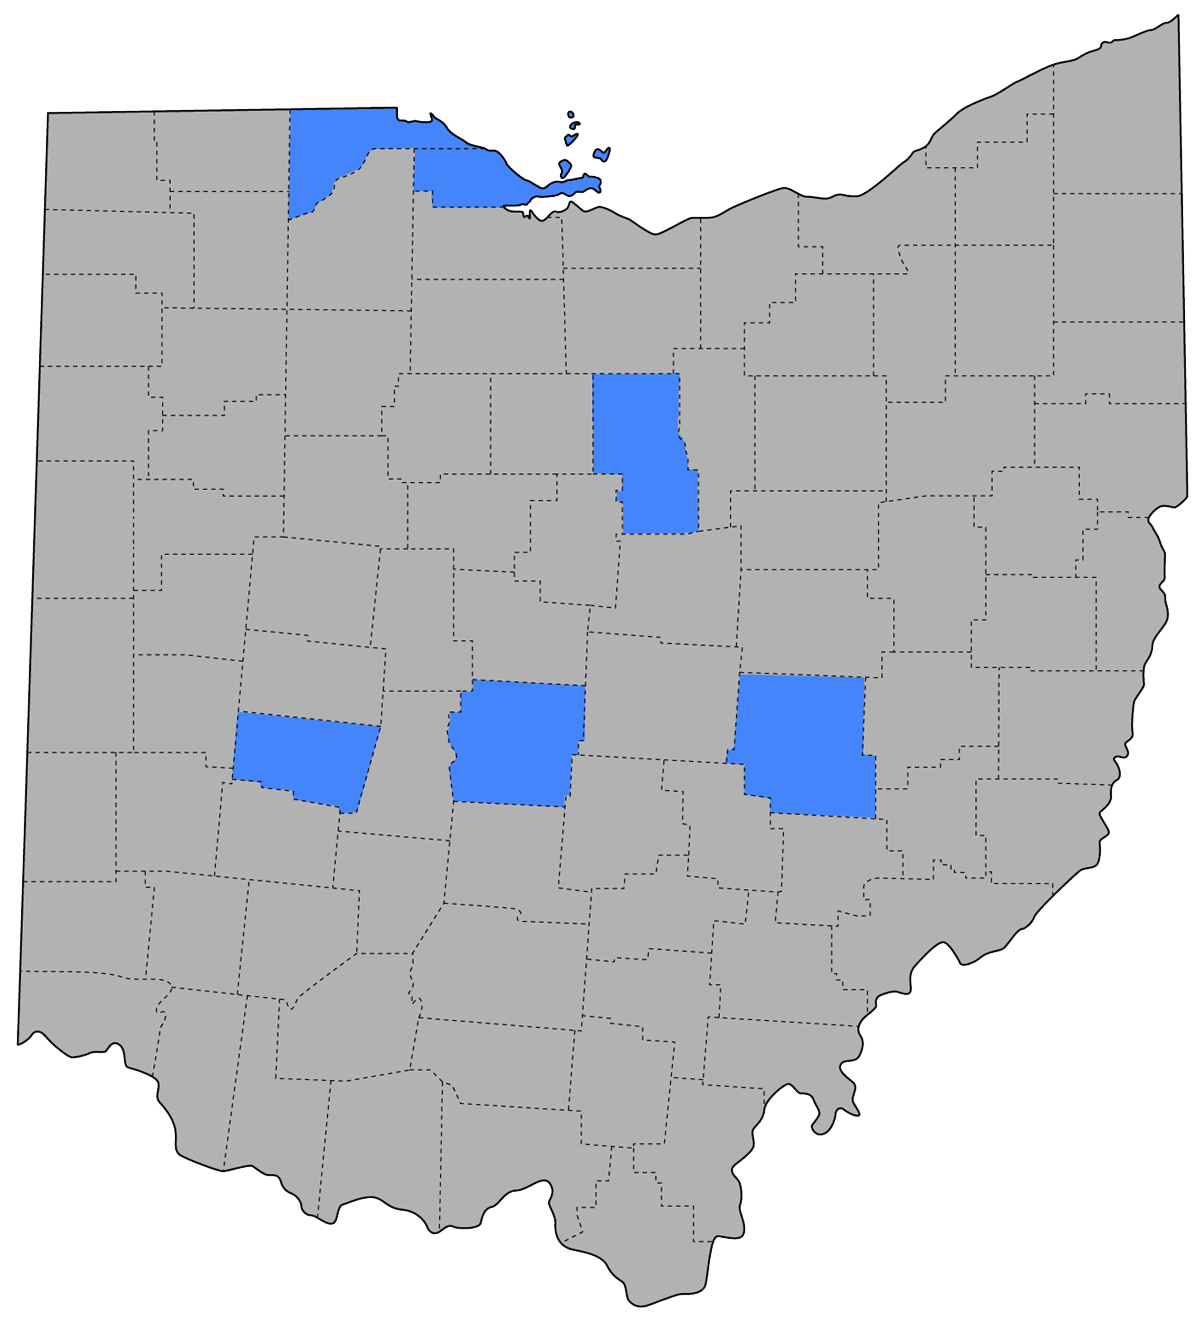 Ohio county map with highlighted counties for Ohio Air National Guard facilities.